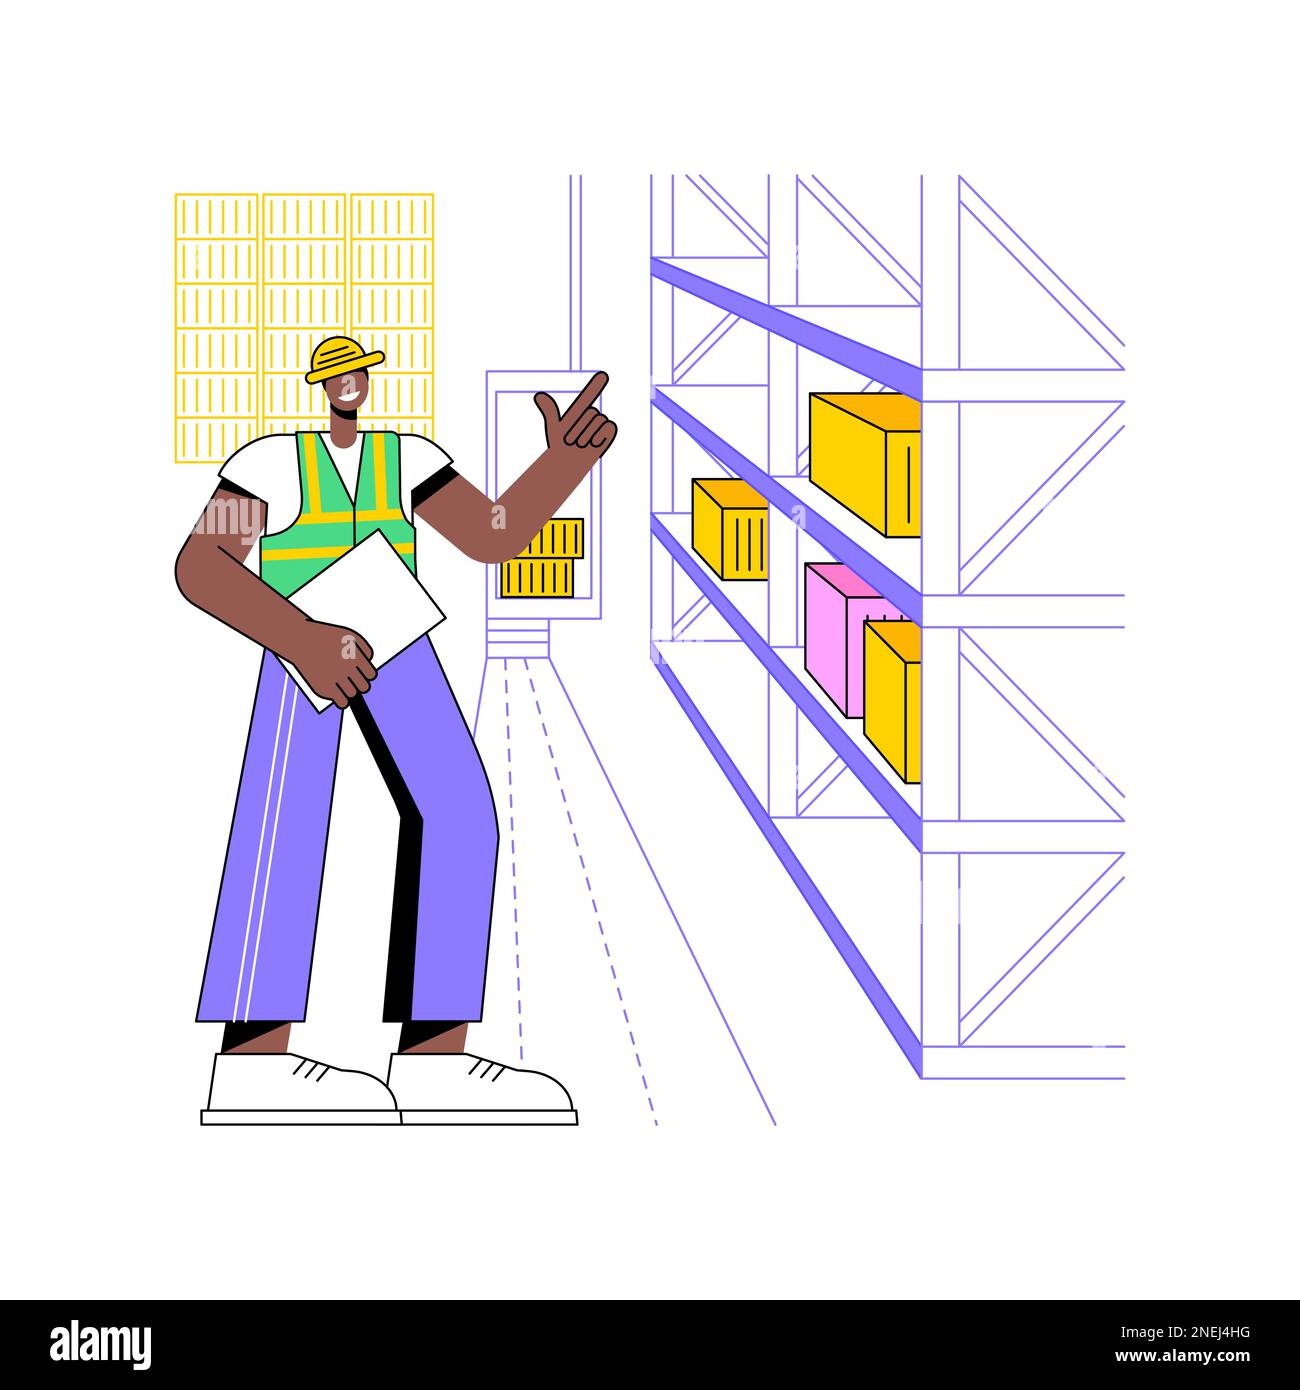 Automated storage and retrieval system isolated cartoon vector illustrations. Warehouse manager controls automatically retrieving of goods, inventory technologies, AS-RS industry vector cartoon. Stock Vector